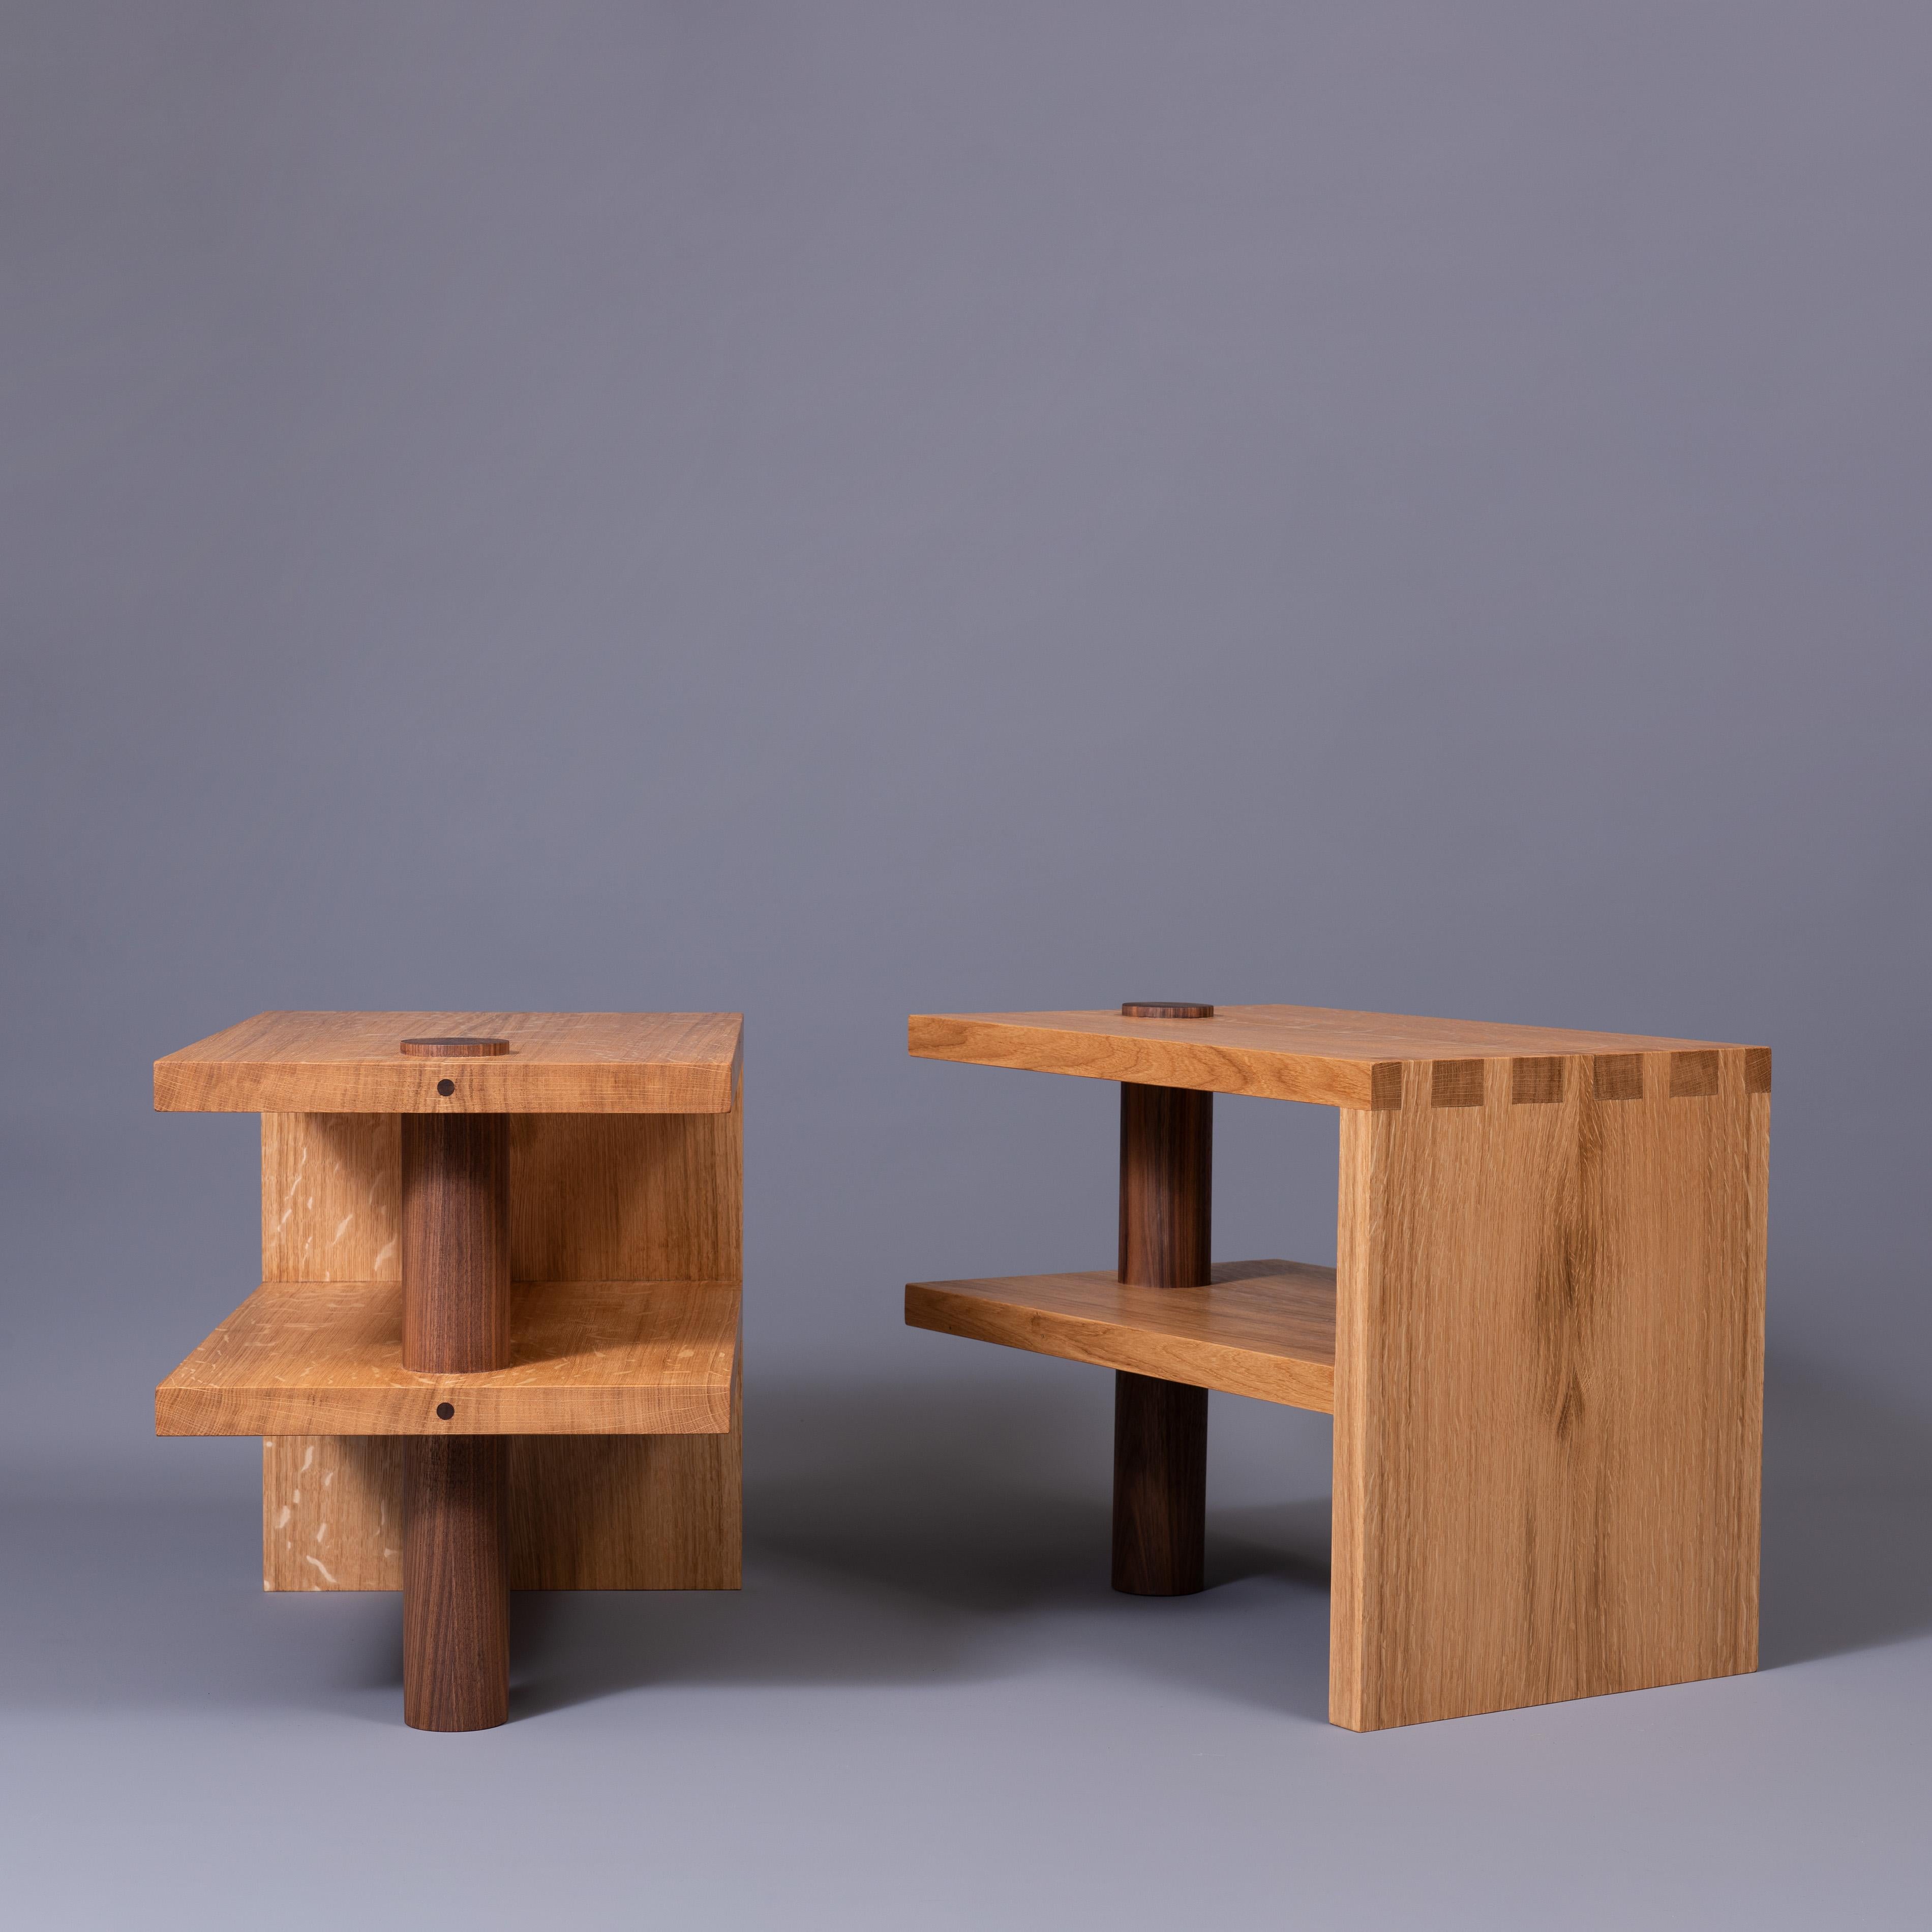 An alternative version of our Architectural Post-Modern oak & walnut pillar table nightstands. Designed and handcrafted in England using traditional furniture and cabinetry techniques from fully quarter-sawn English Oak and American Black Walnut.